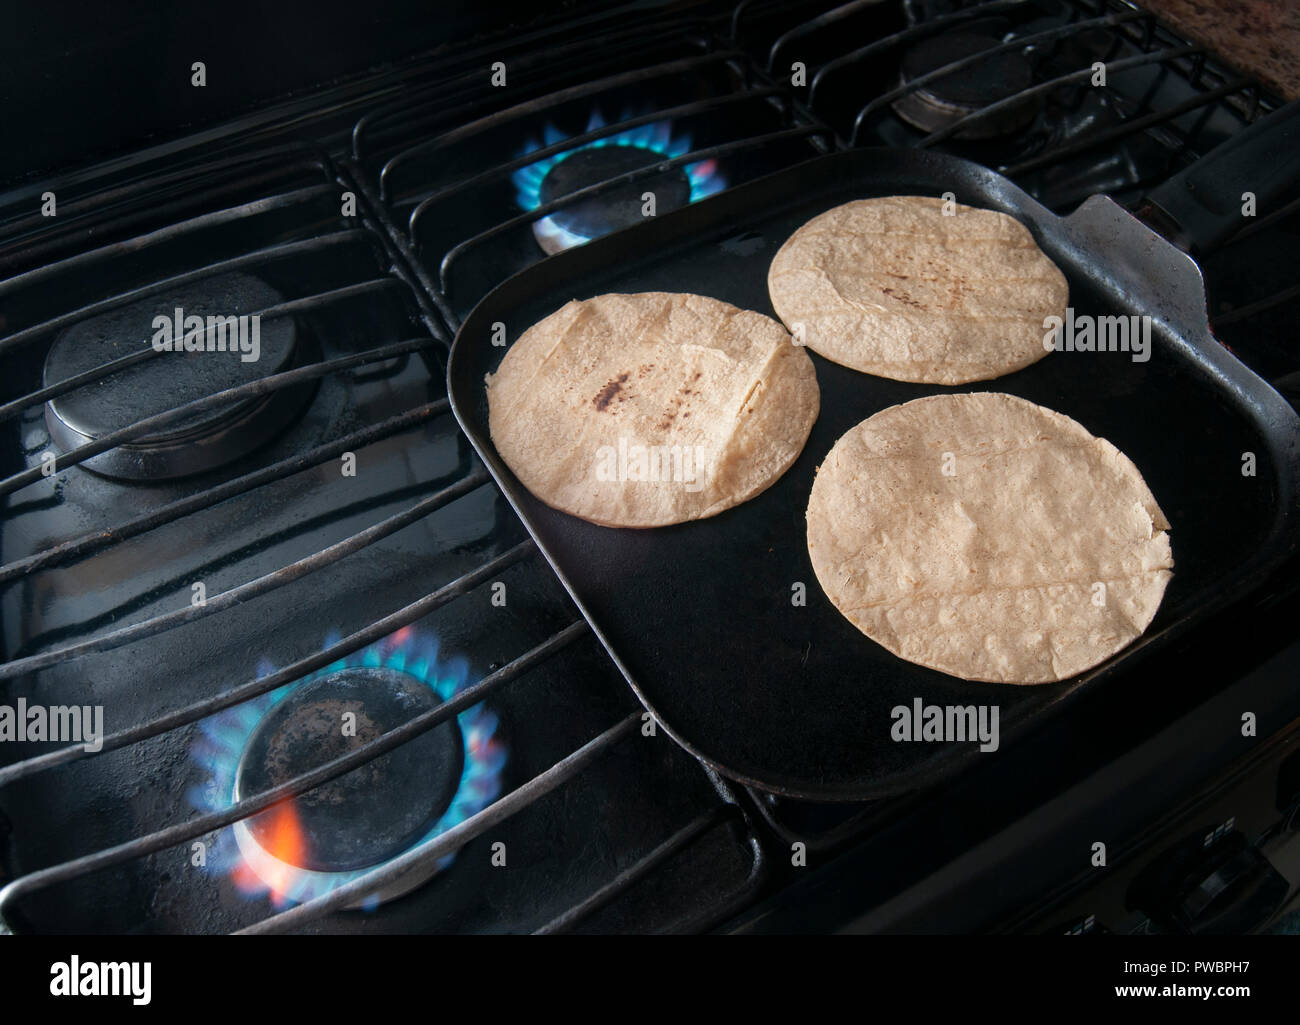 Mexican Comal - cookware stock photo. Image of drink - 38725442